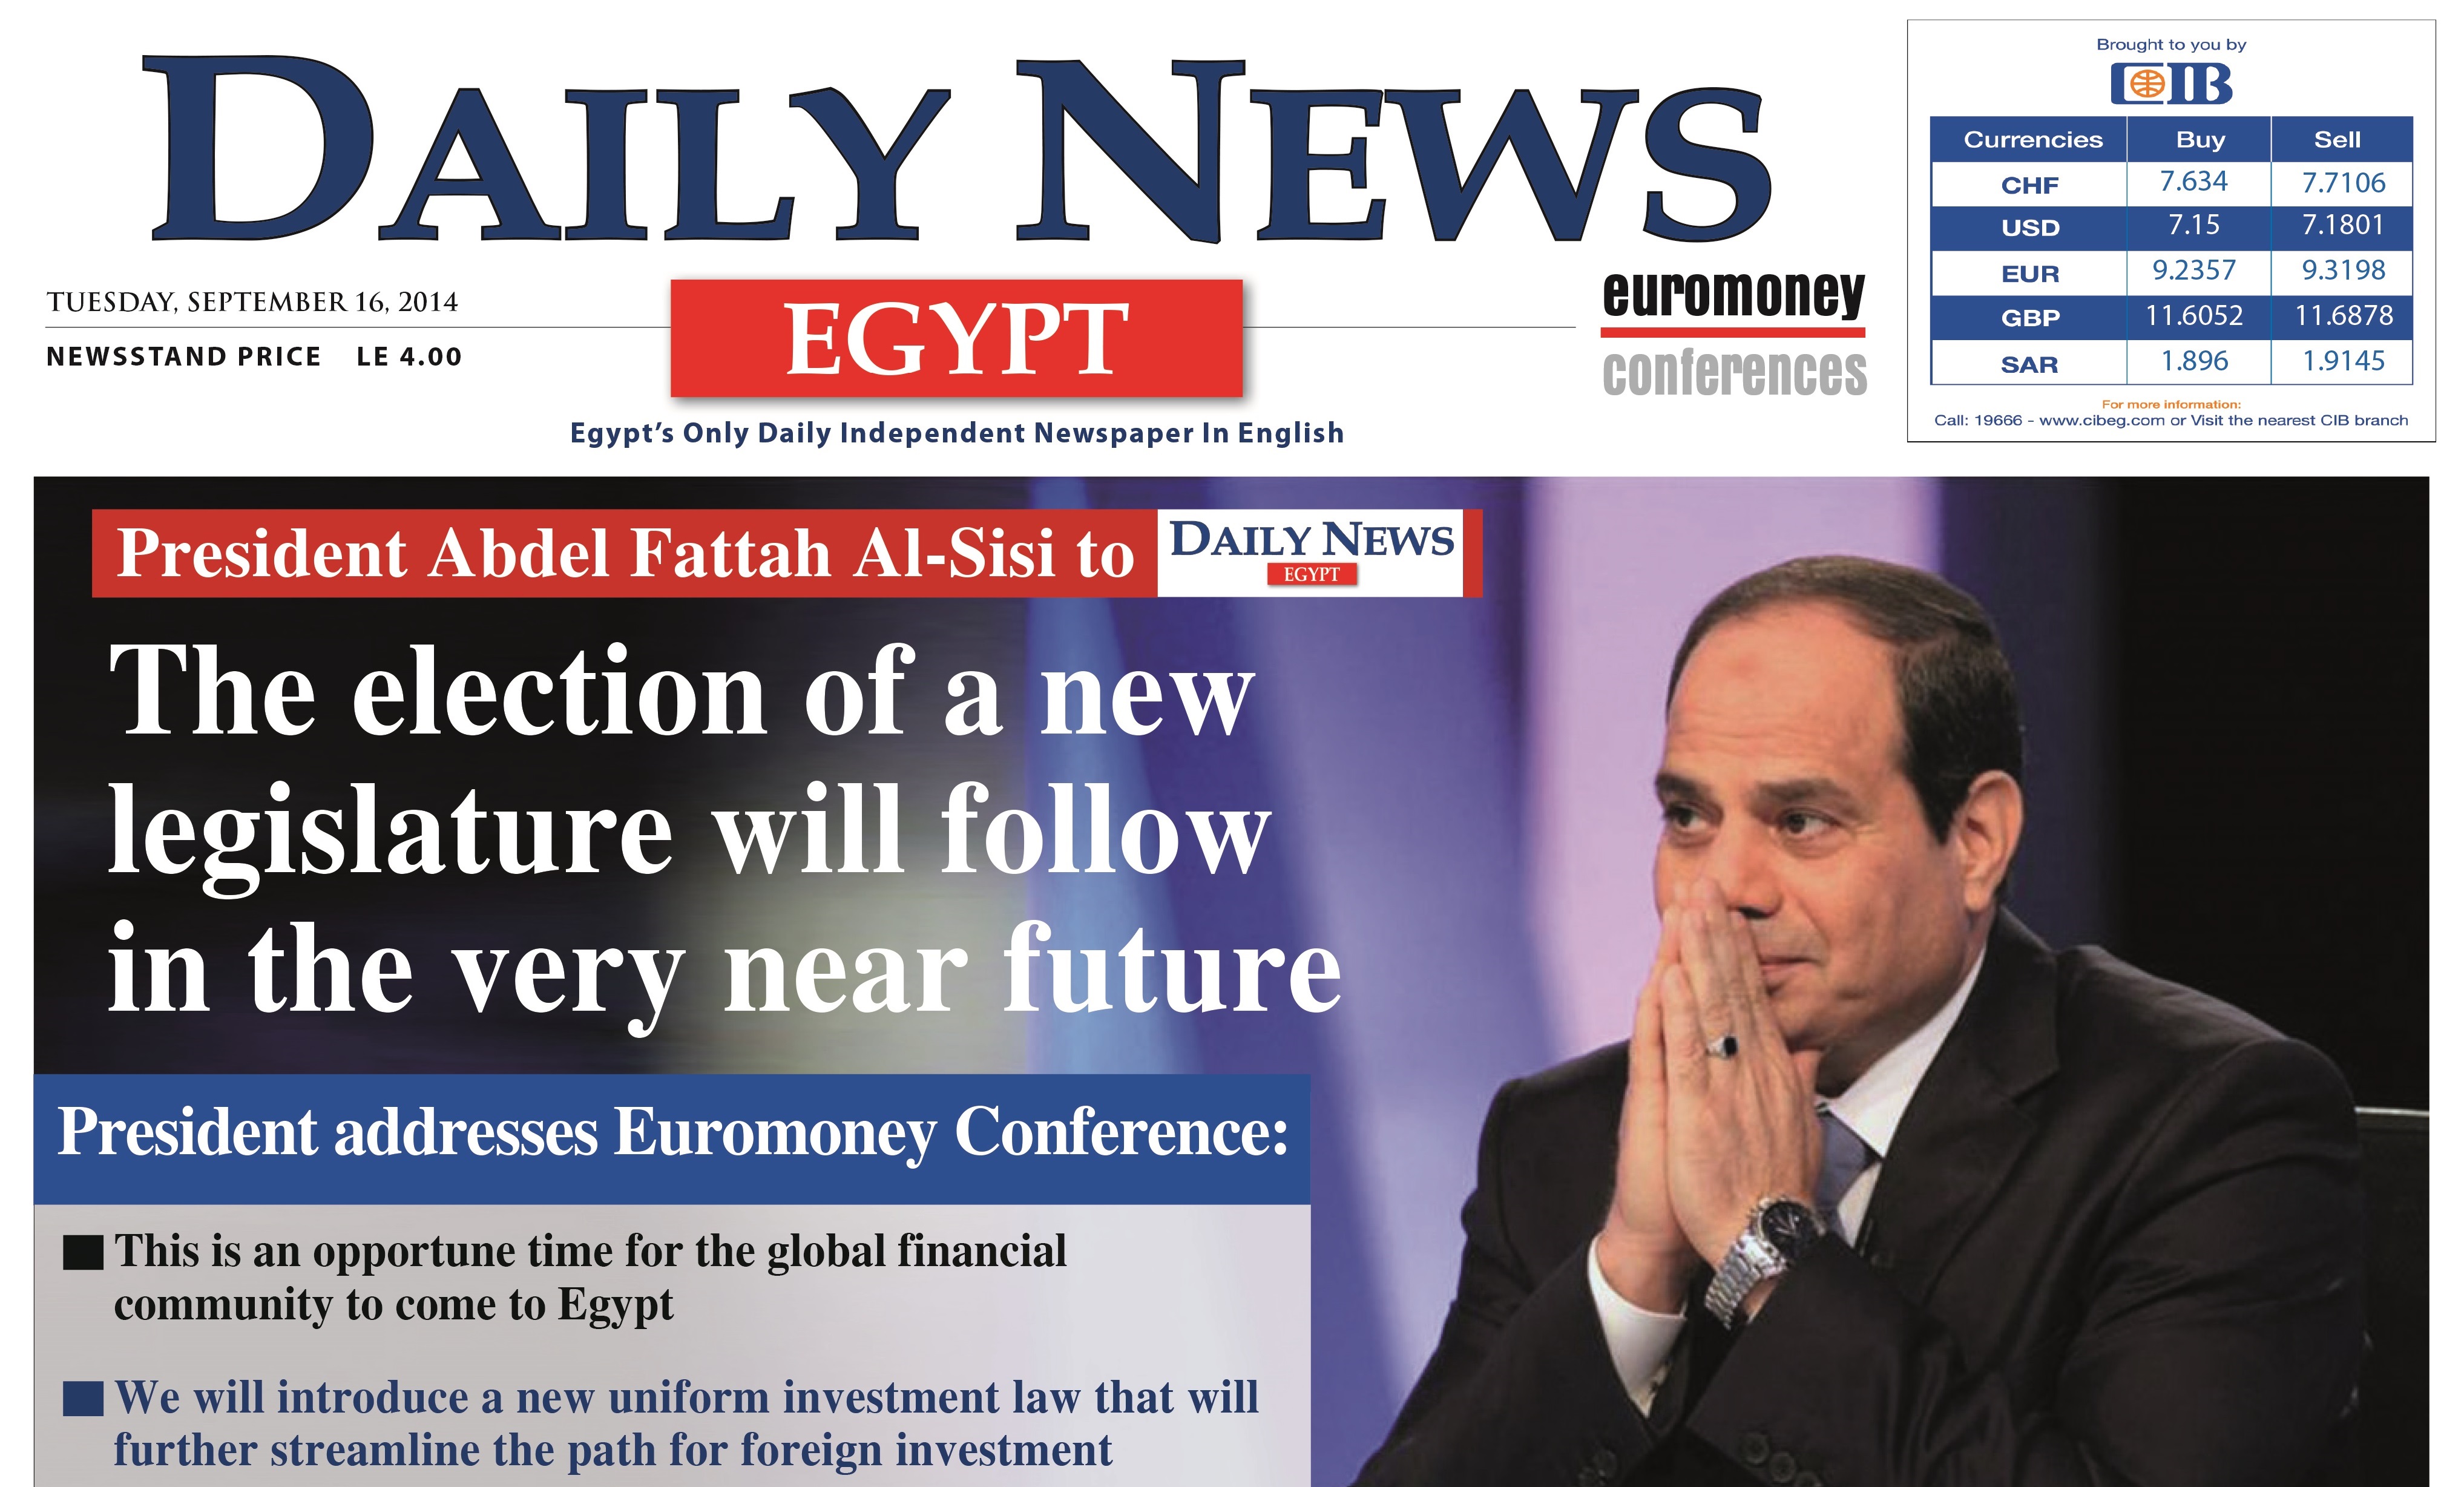 Daily News Egypt 'Blocked' in Egypt | Egyptian Streets